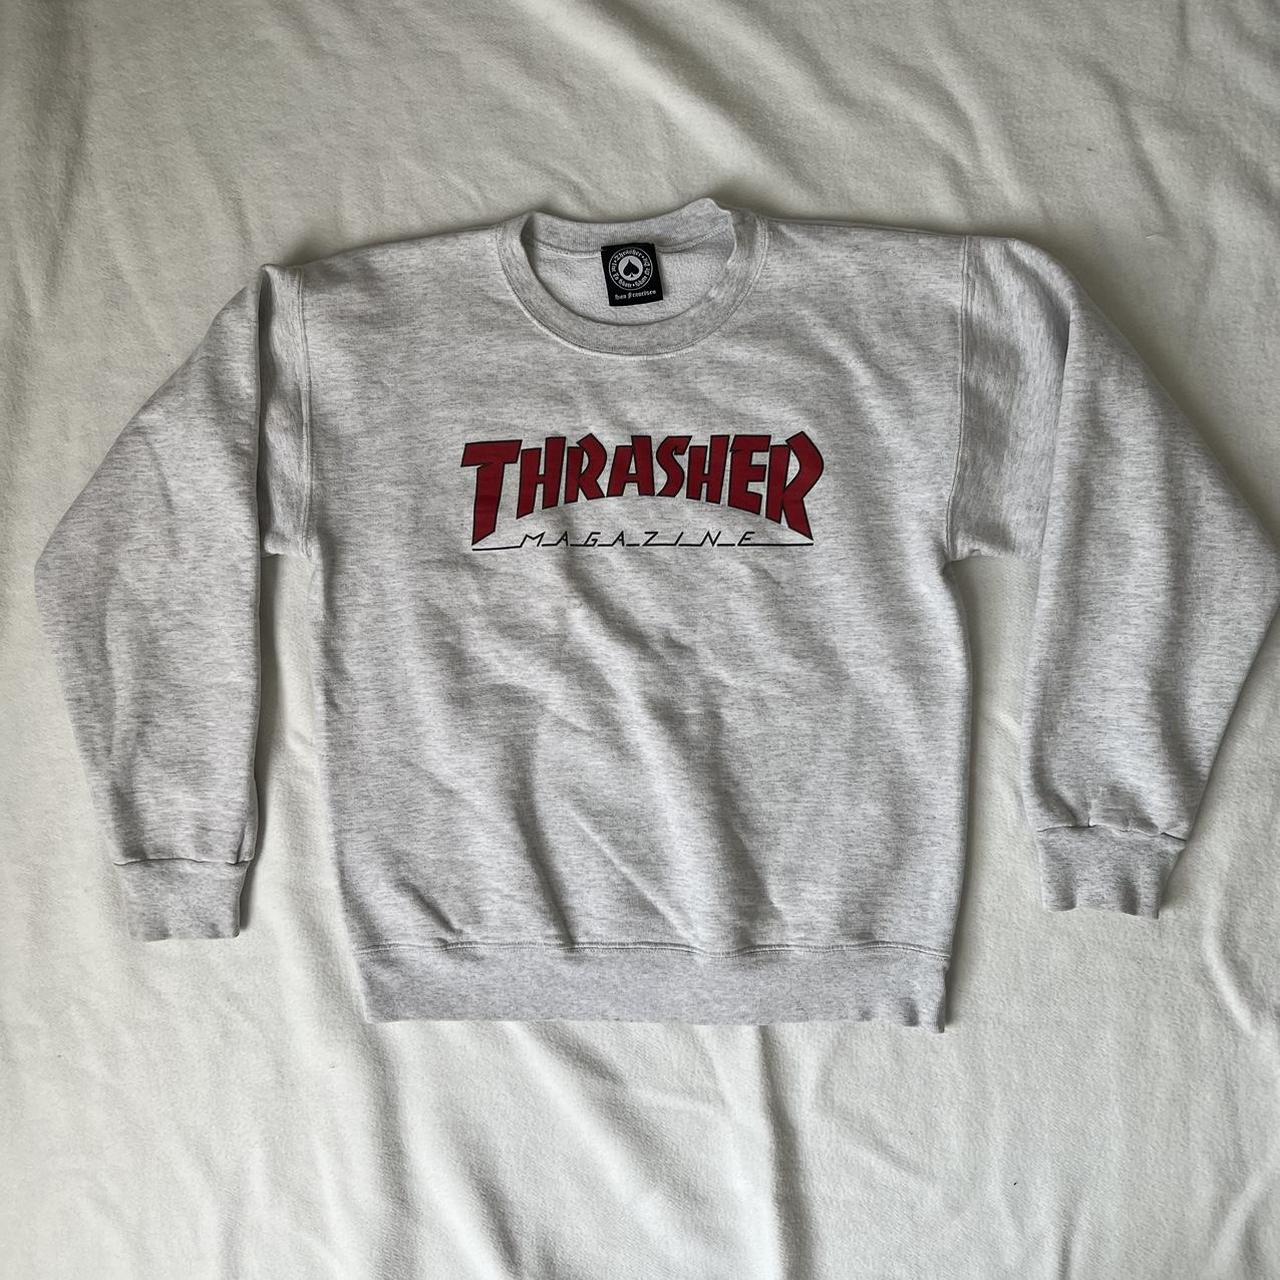 Thrasher Crewneck - Size S - no flaws of any kind - Depop